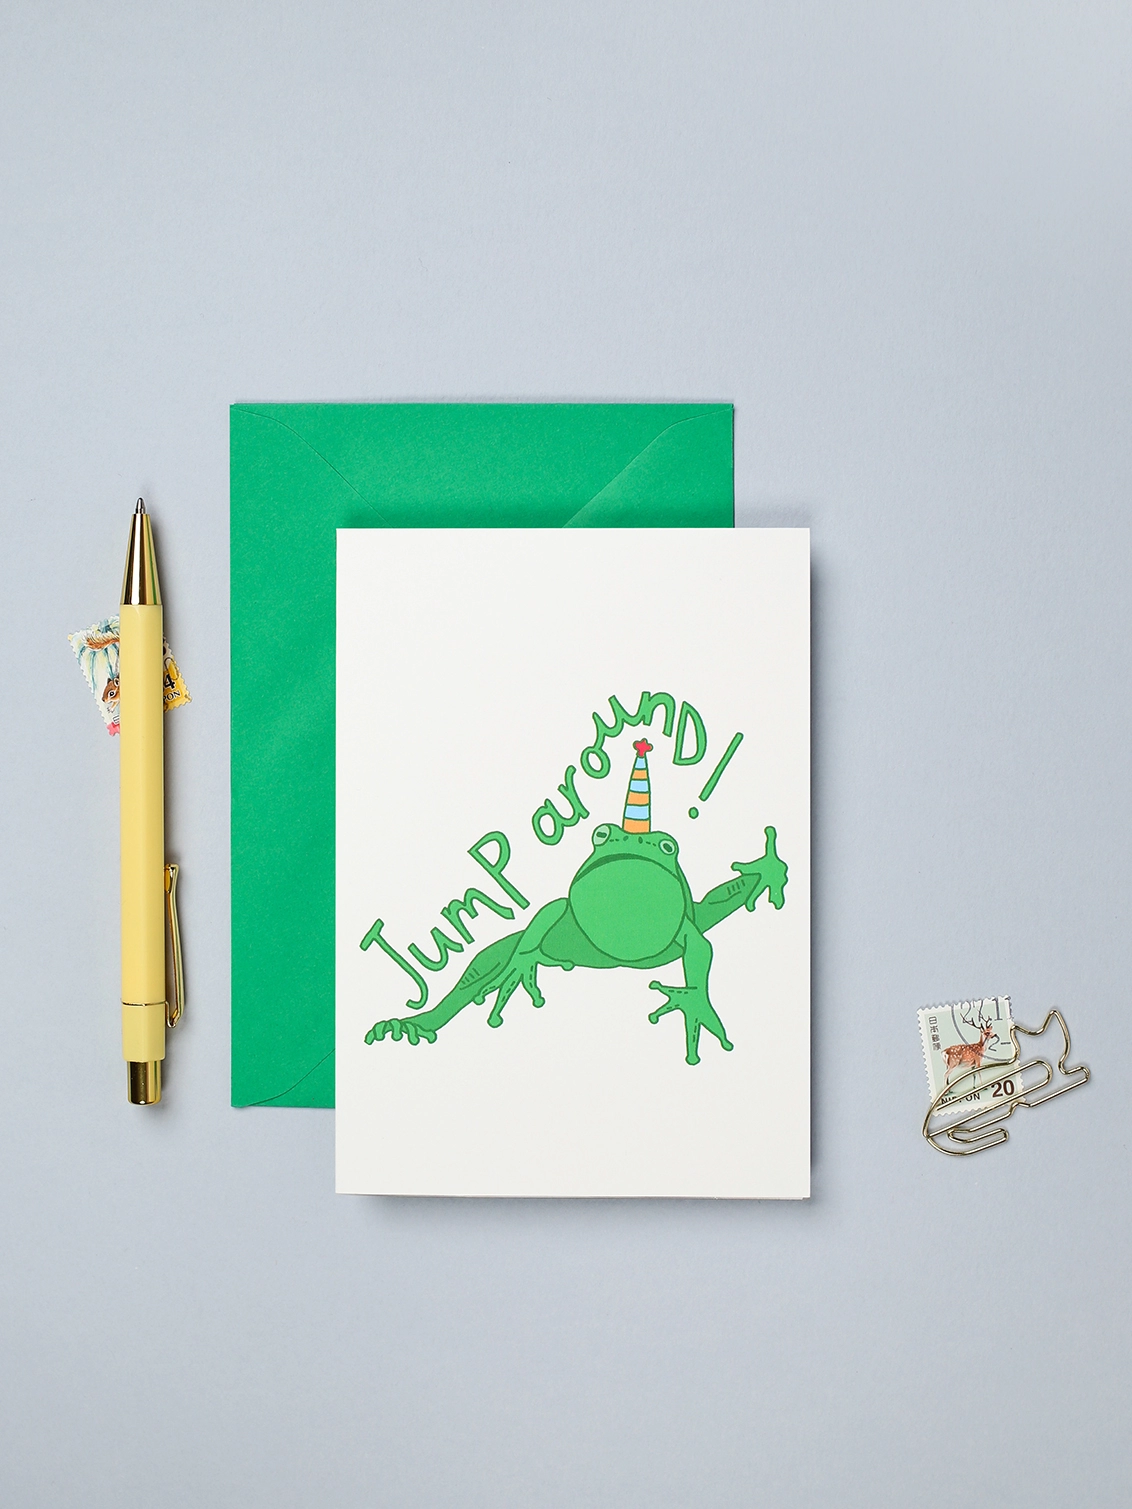 Colourful card for a party or birthday featuring a jumping frog in a party hat